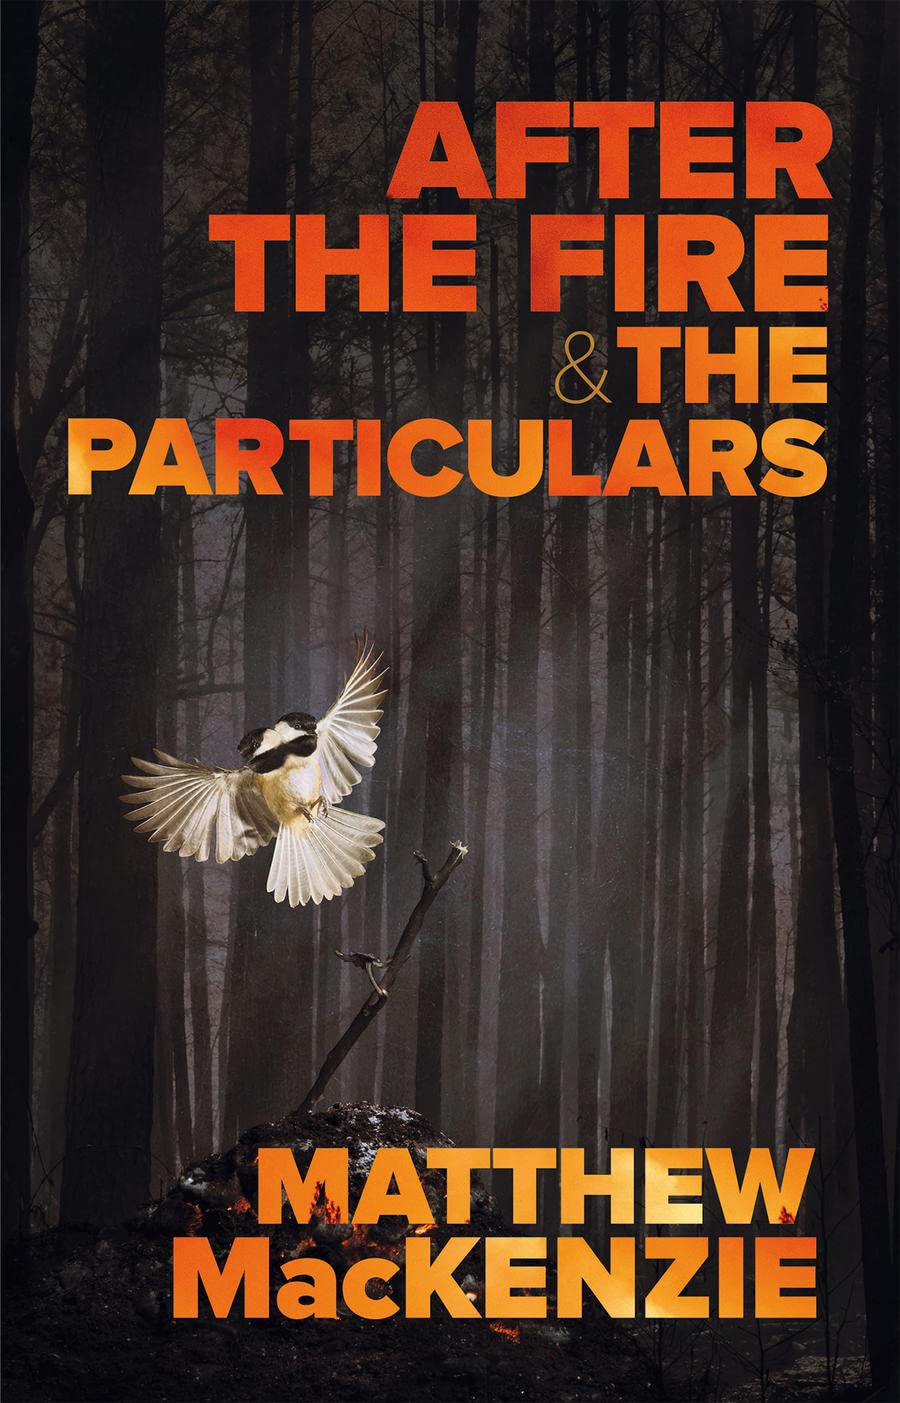 After the Fire & The Particulars by Matthew MacKenzie